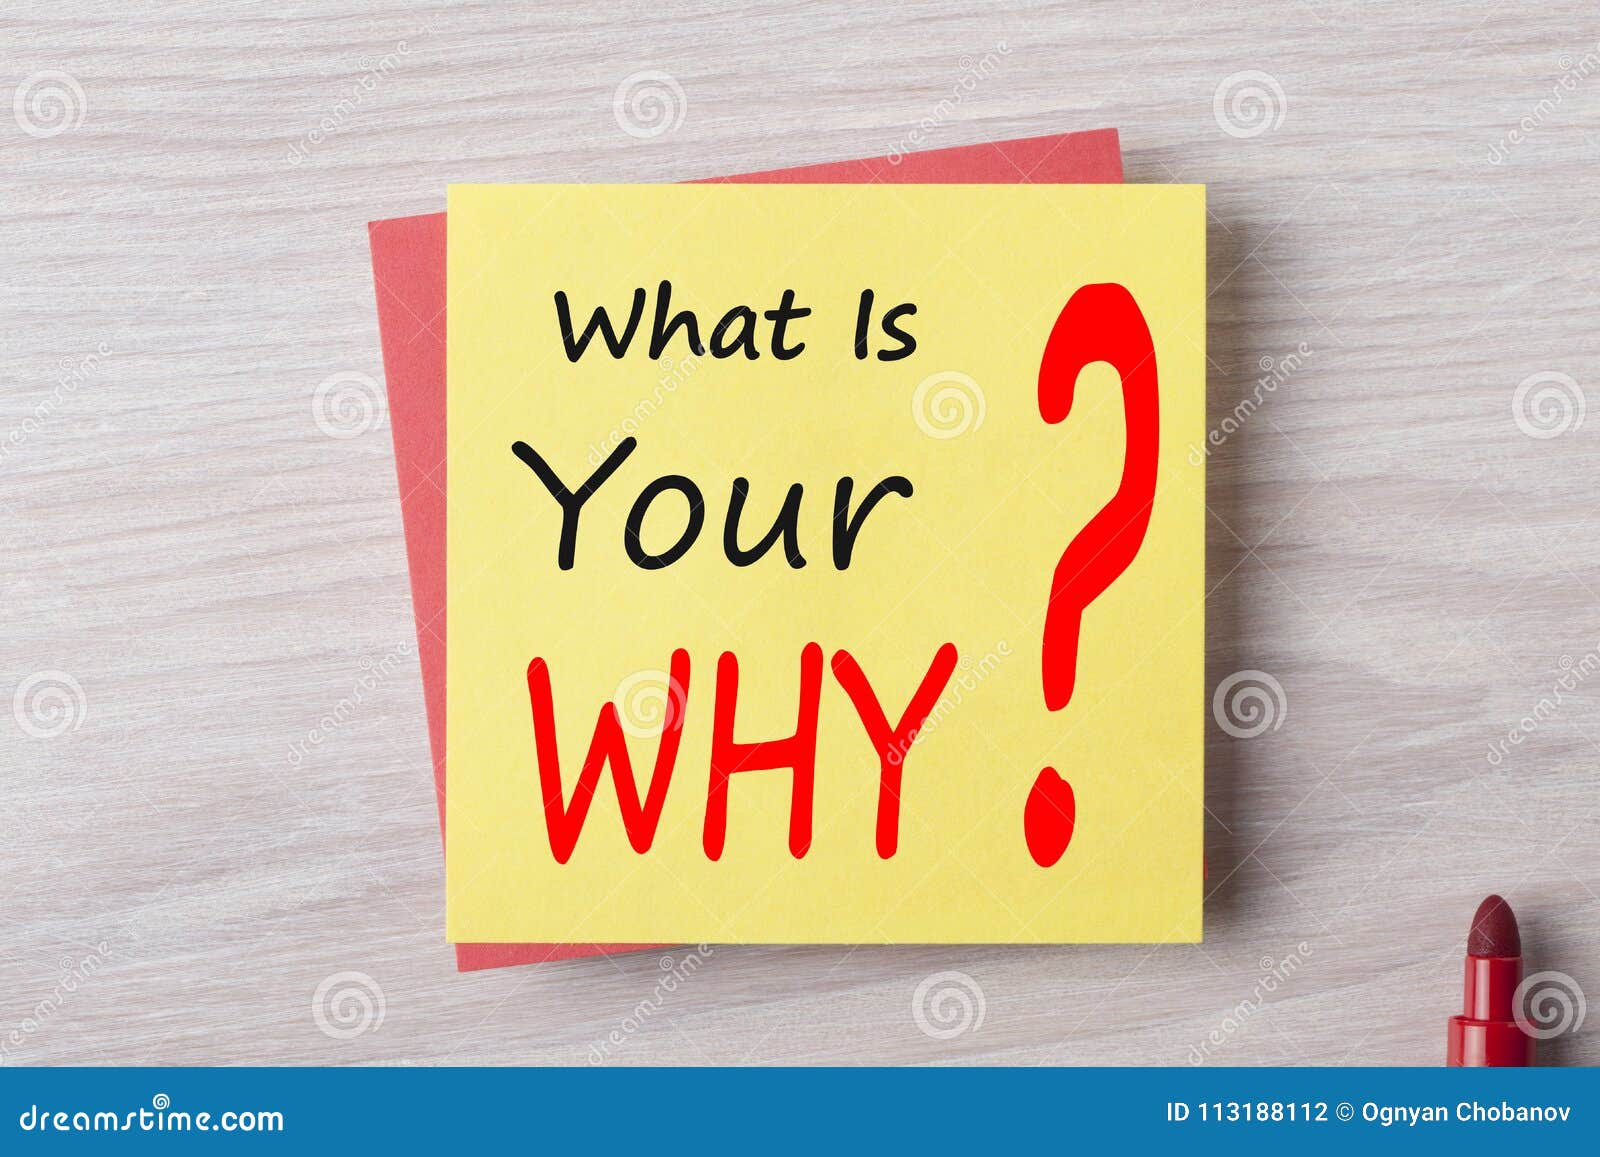 what is your why written on note concept